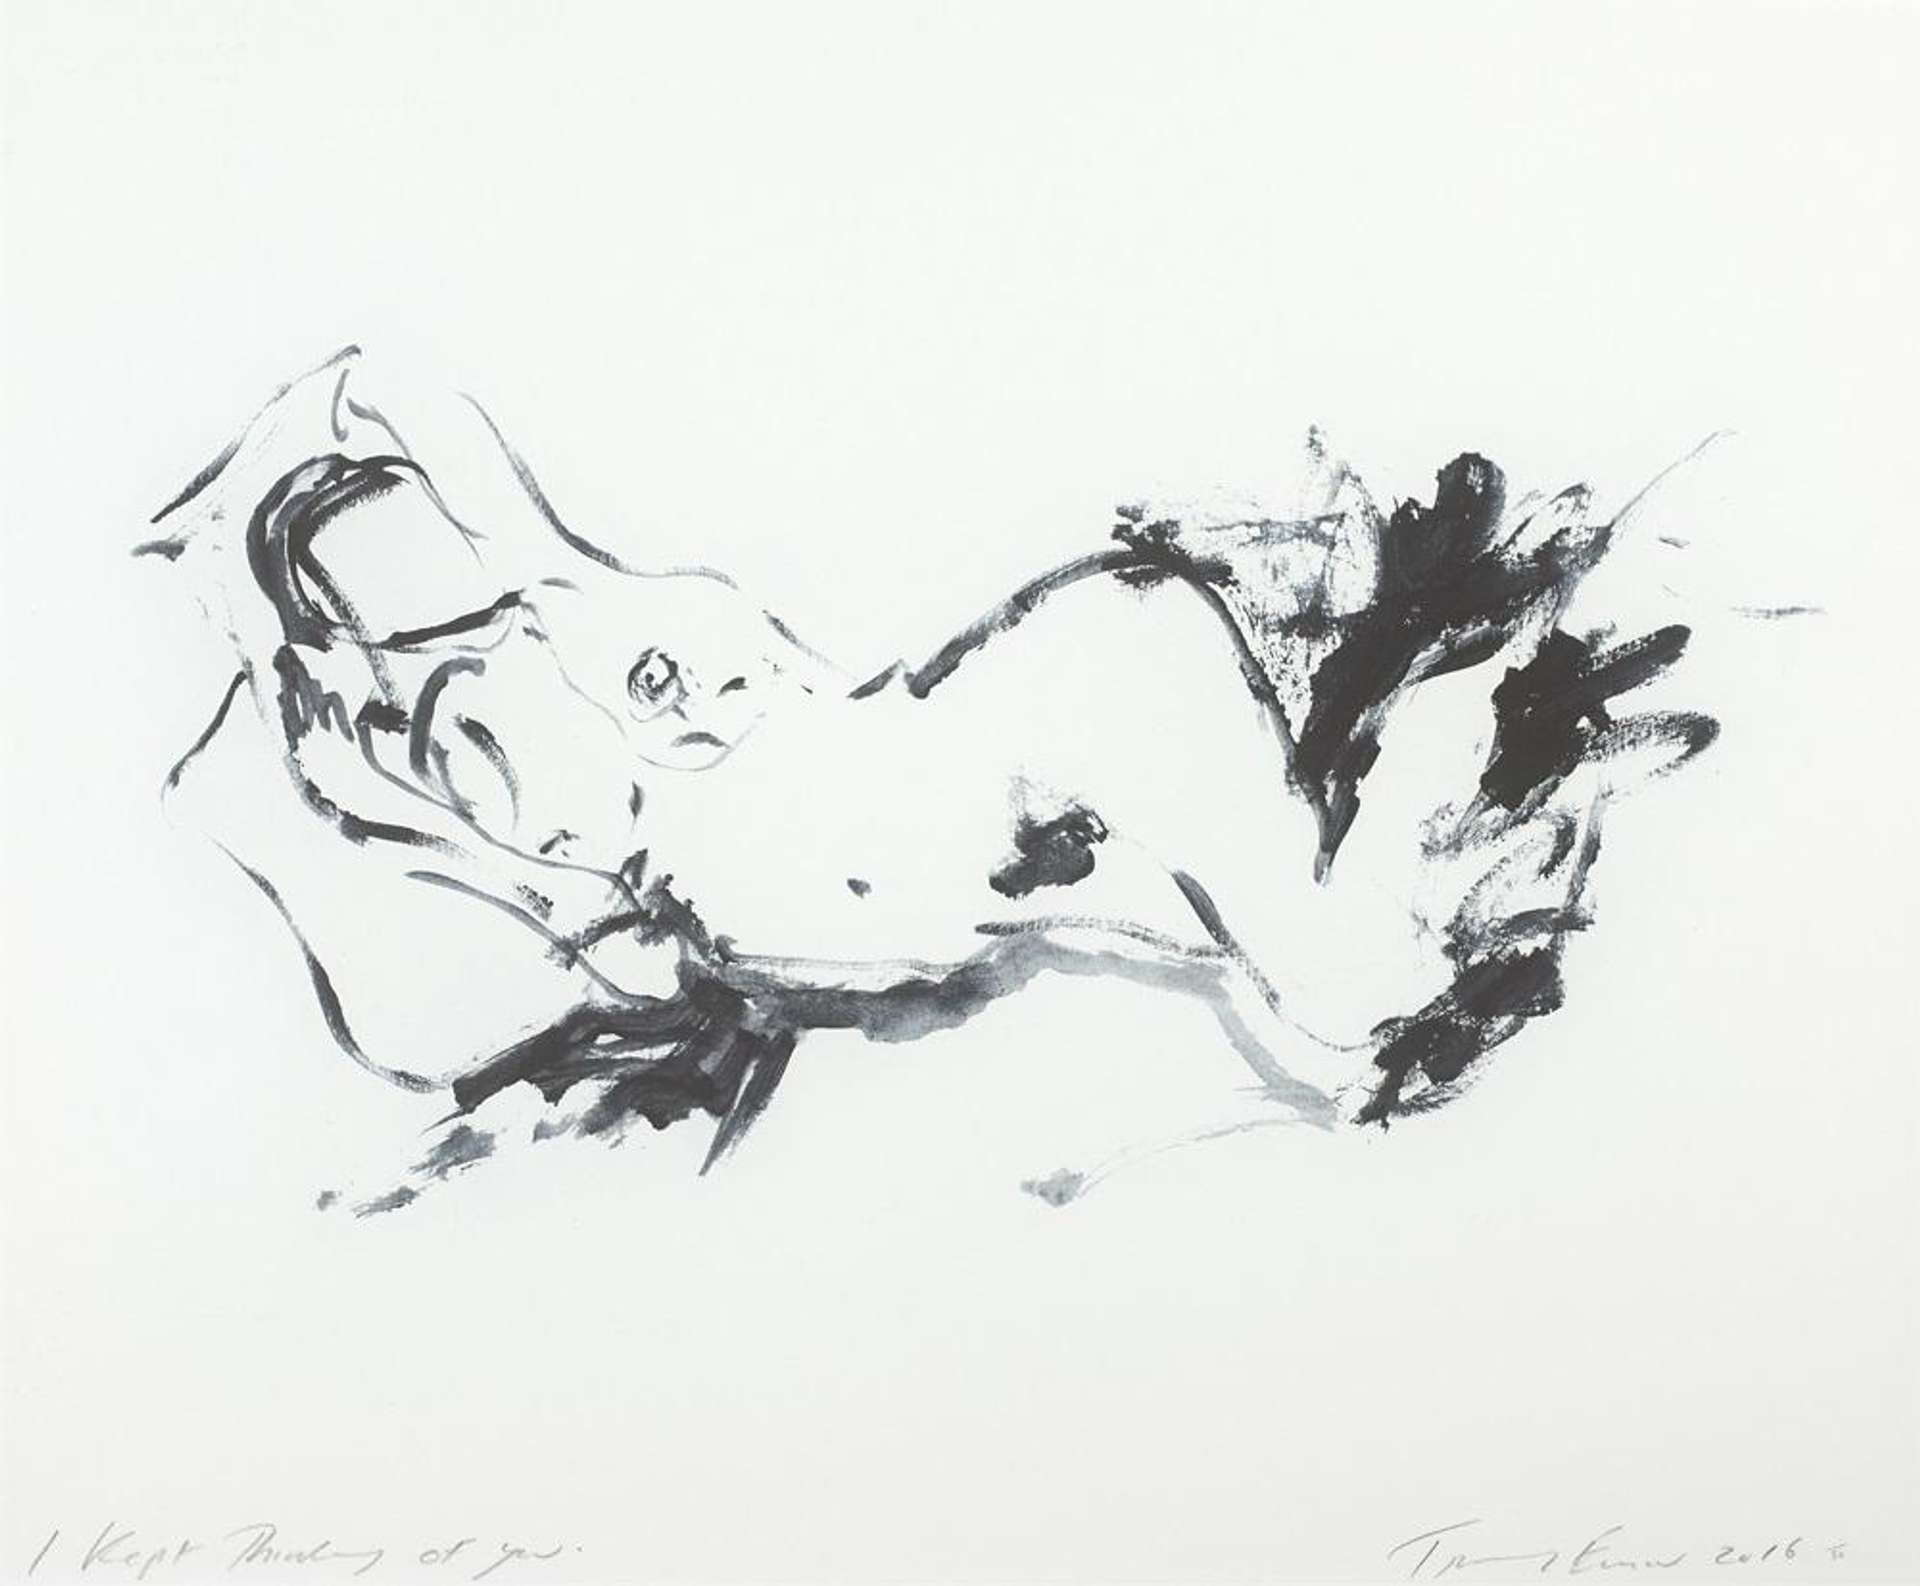 I Kept Thinking Of You by Tracey Emin